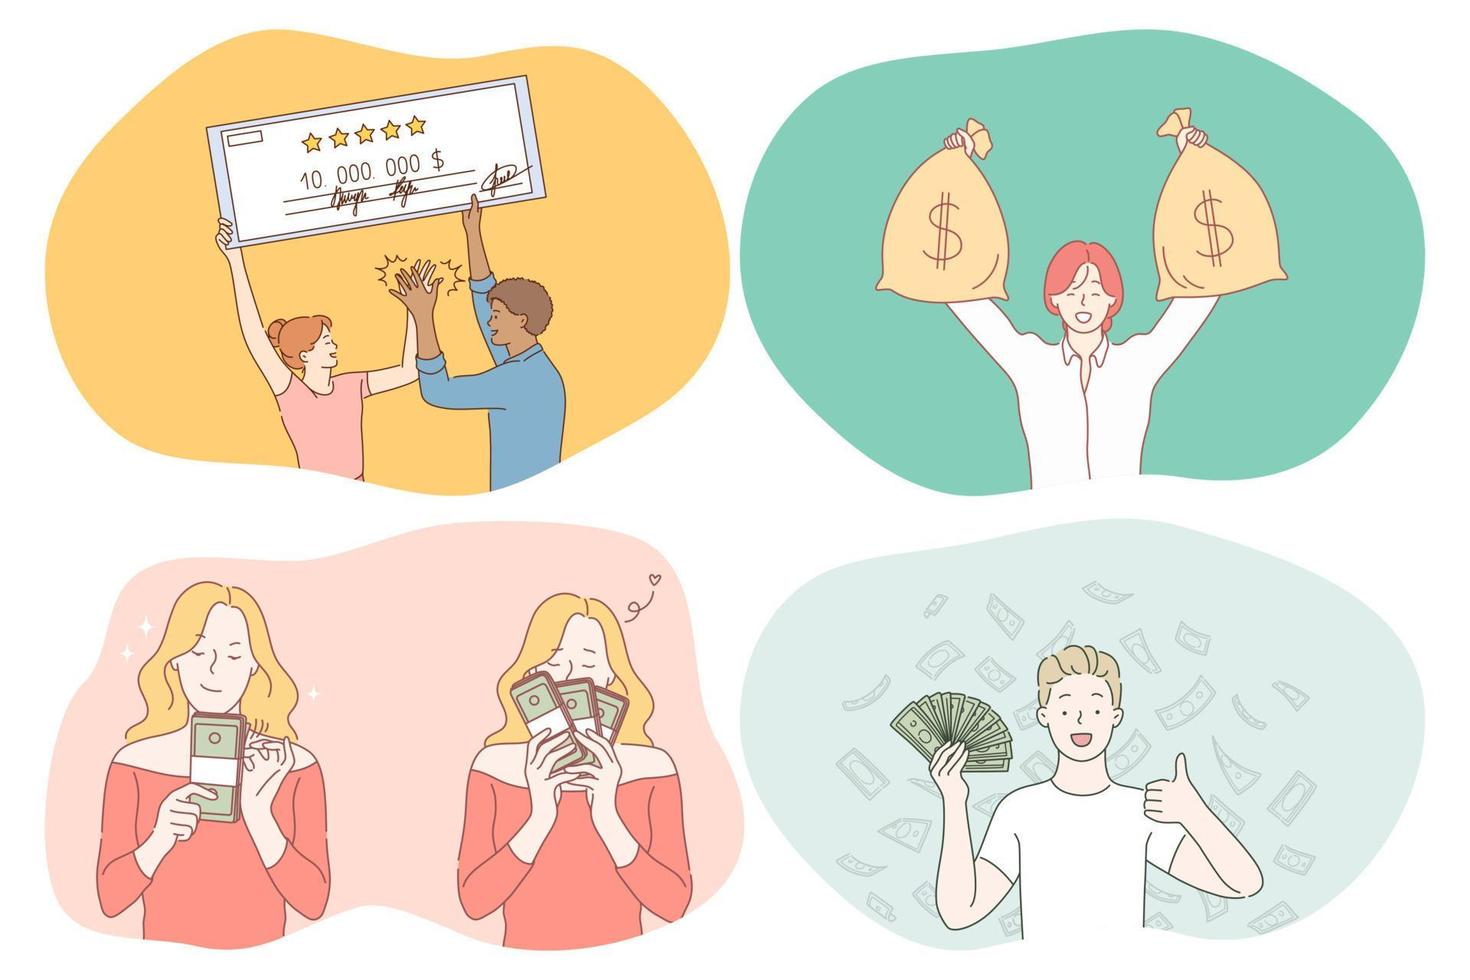 Money, wealth, jackpot concept. Young happy people cartoon characters holding check for big amount of money, sacks with cash, heaps ob banknotes and earning good salary. Cash finance savings vector